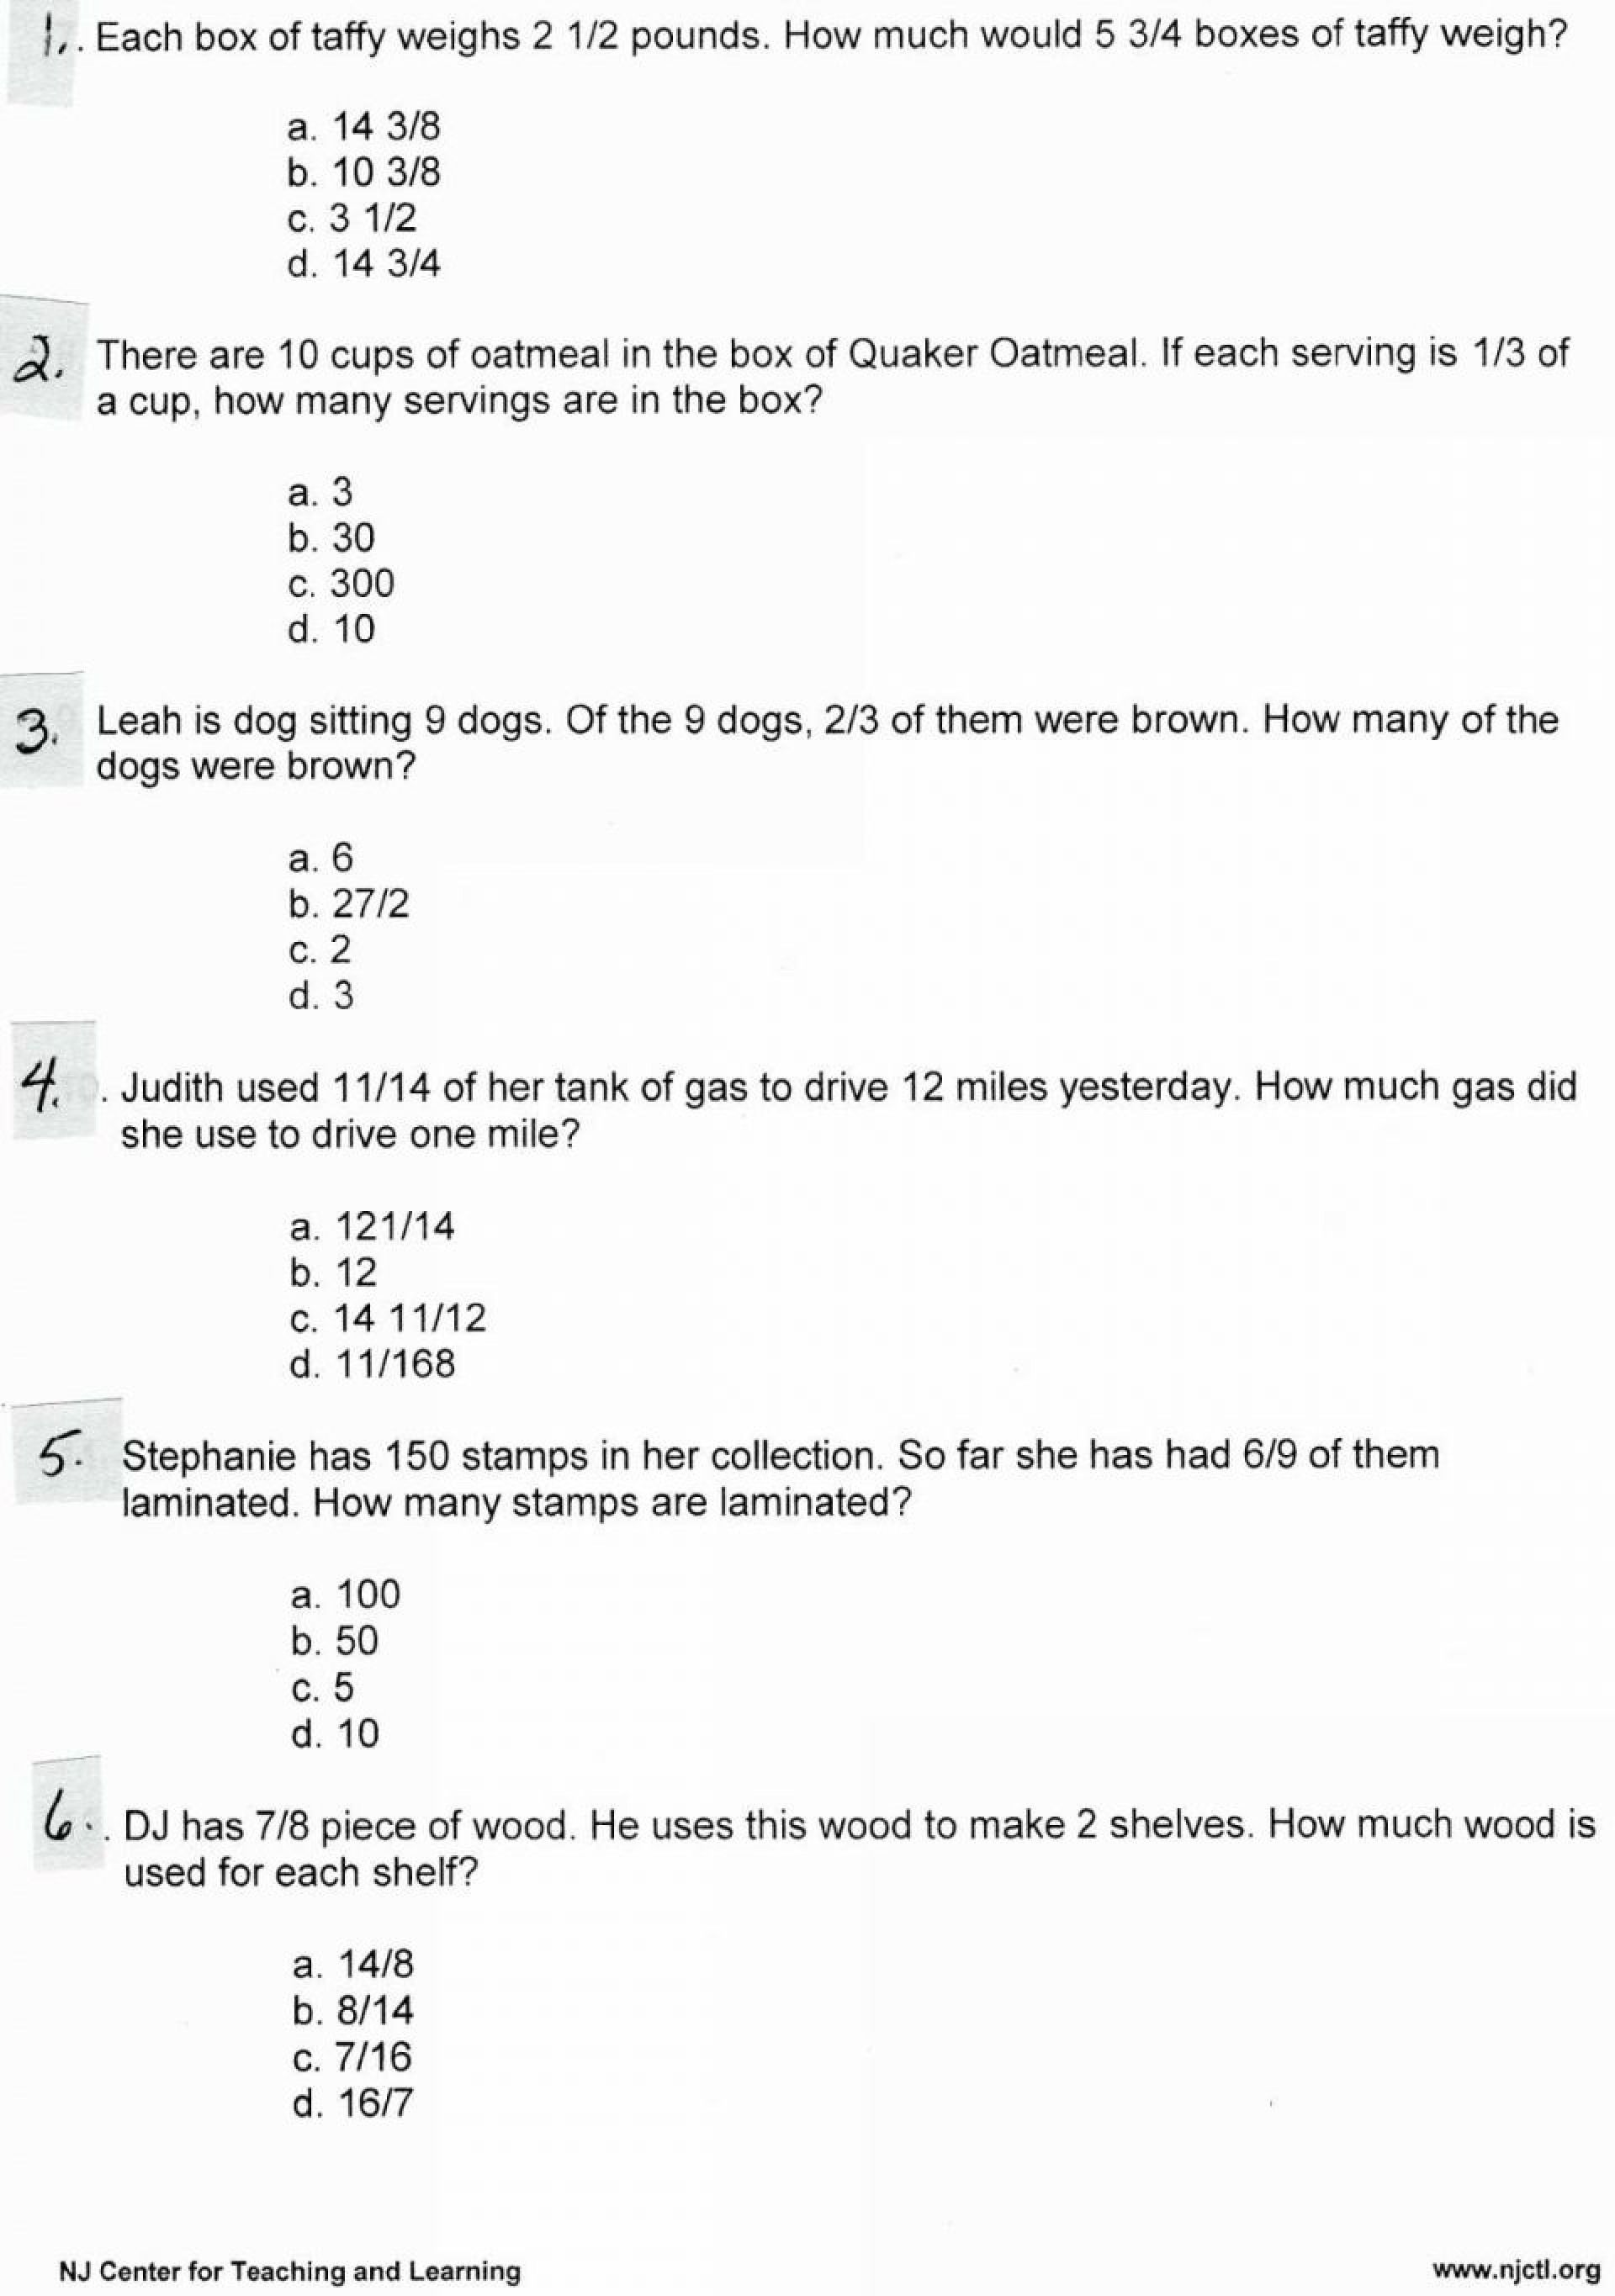 word-problems-fractions-division-with-mixed-numbers-edboost